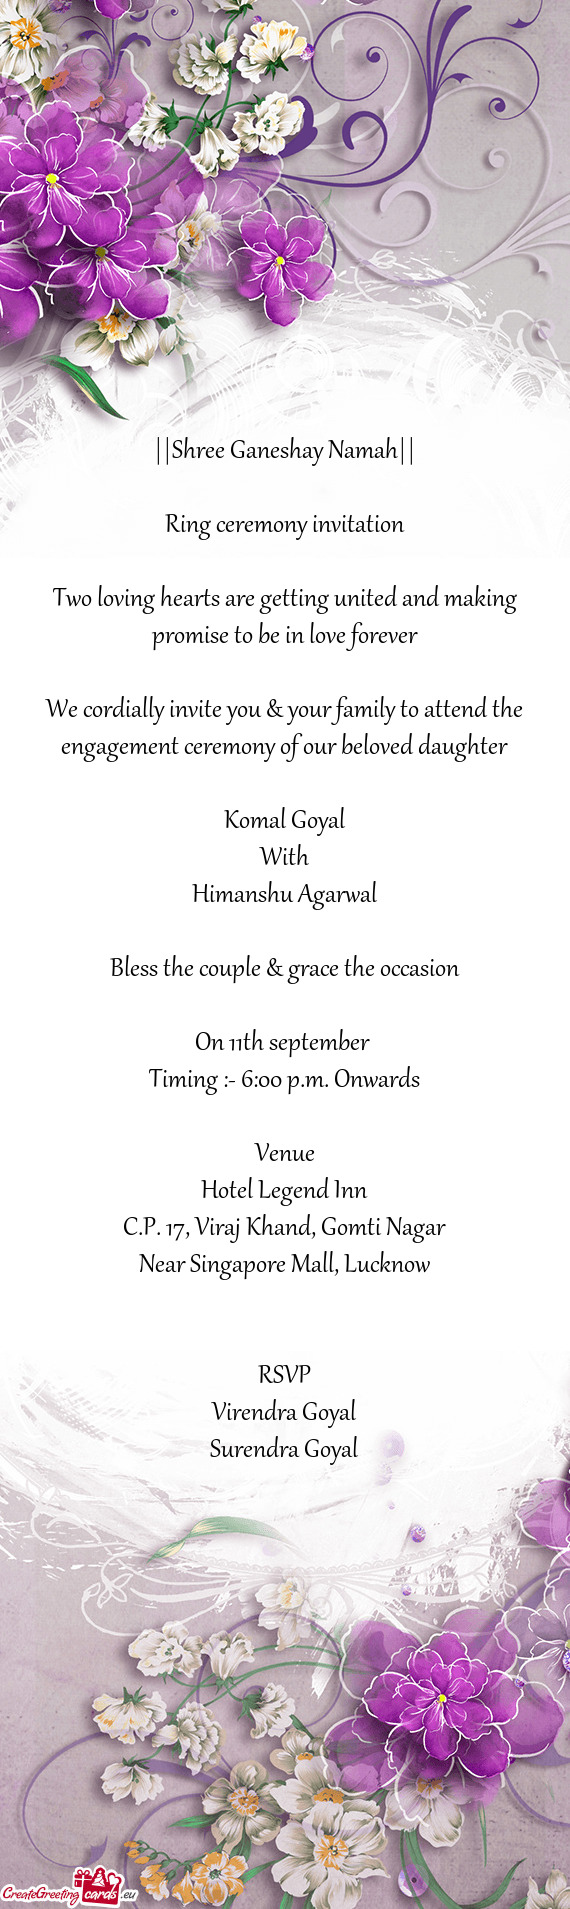 We cordially invite you & your family to attend the engagement ceremony of our beloved daughter